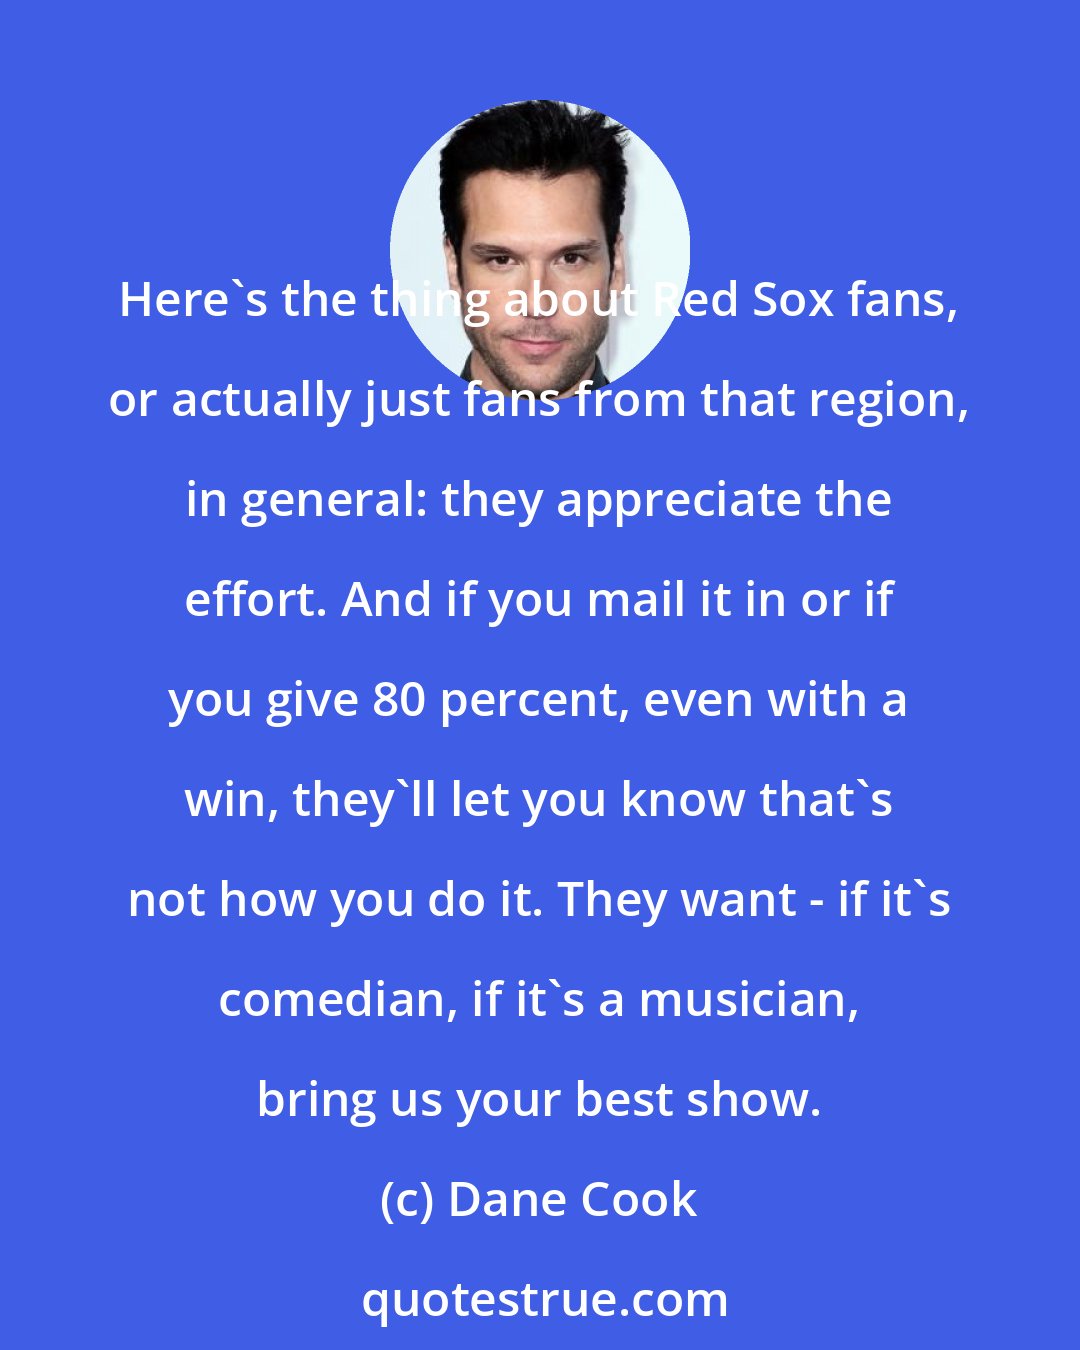 Dane Cook: Here's the thing about Red Sox fans, or actually just fans from that region, in general: they appreciate the effort. And if you mail it in or if you give 80 percent, even with a win, they'll let you know that's not how you do it. They want - if it's comedian, if it's a musician, bring us your best show.